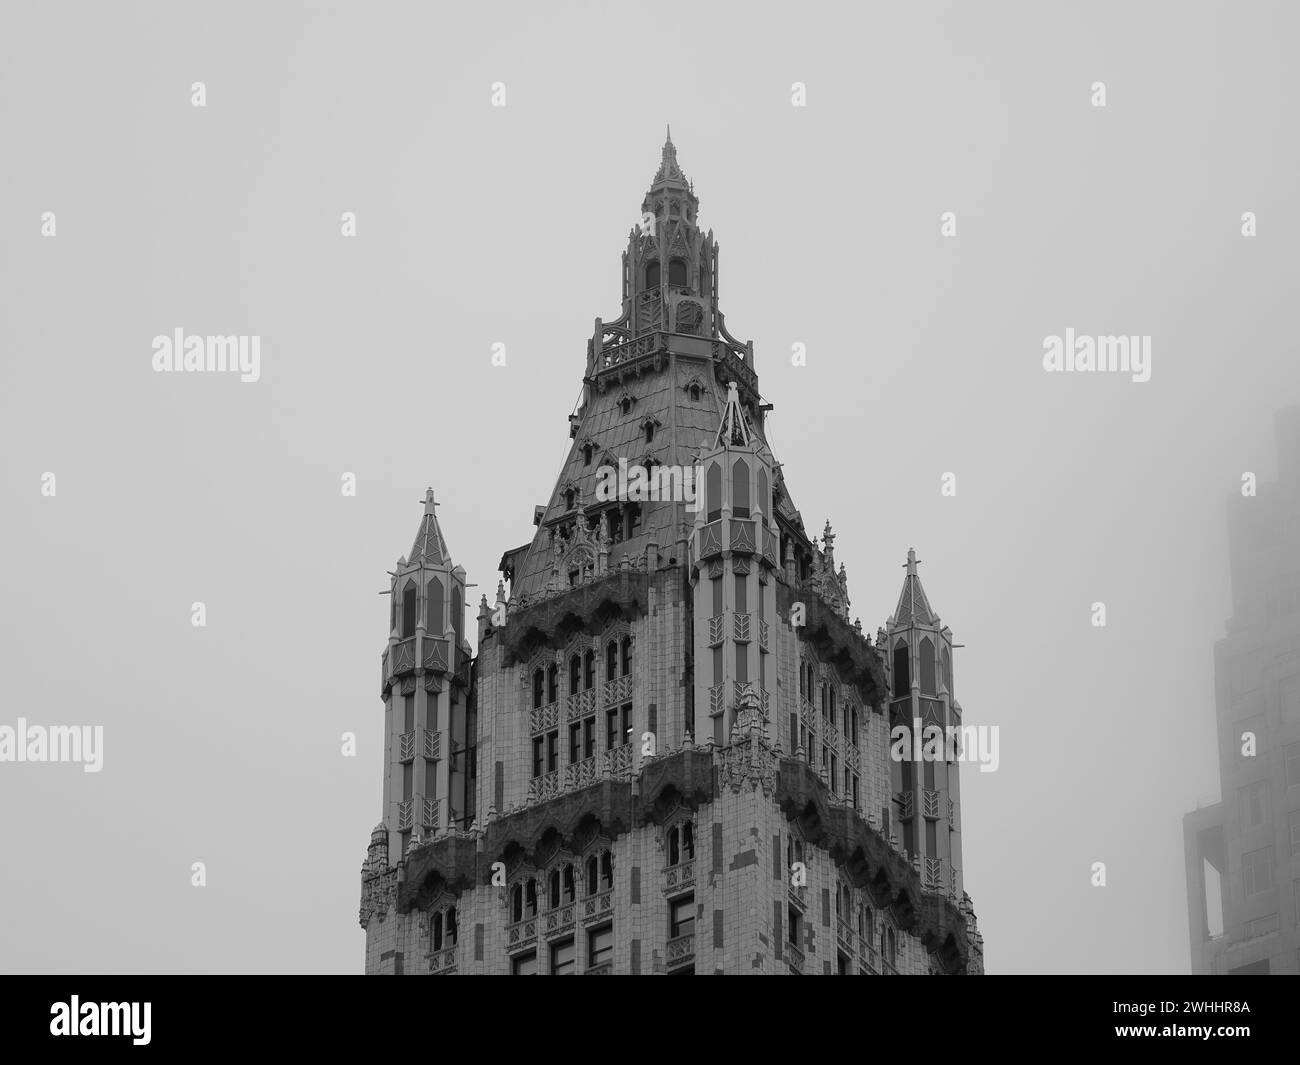 Monochromatic image of the Woolworth building. Stock Photo